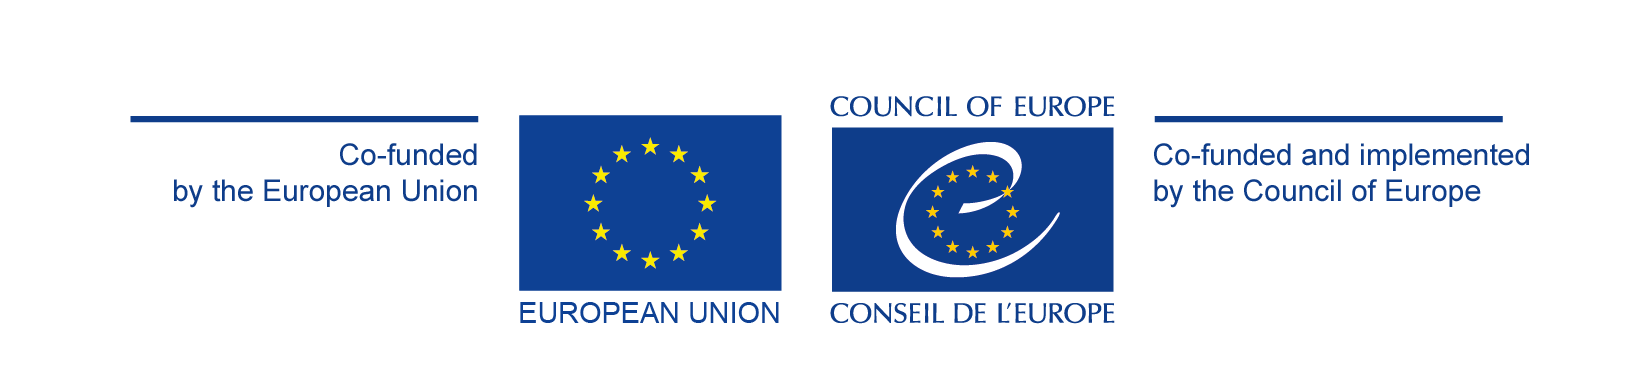 EU and Council of Europe joint logo